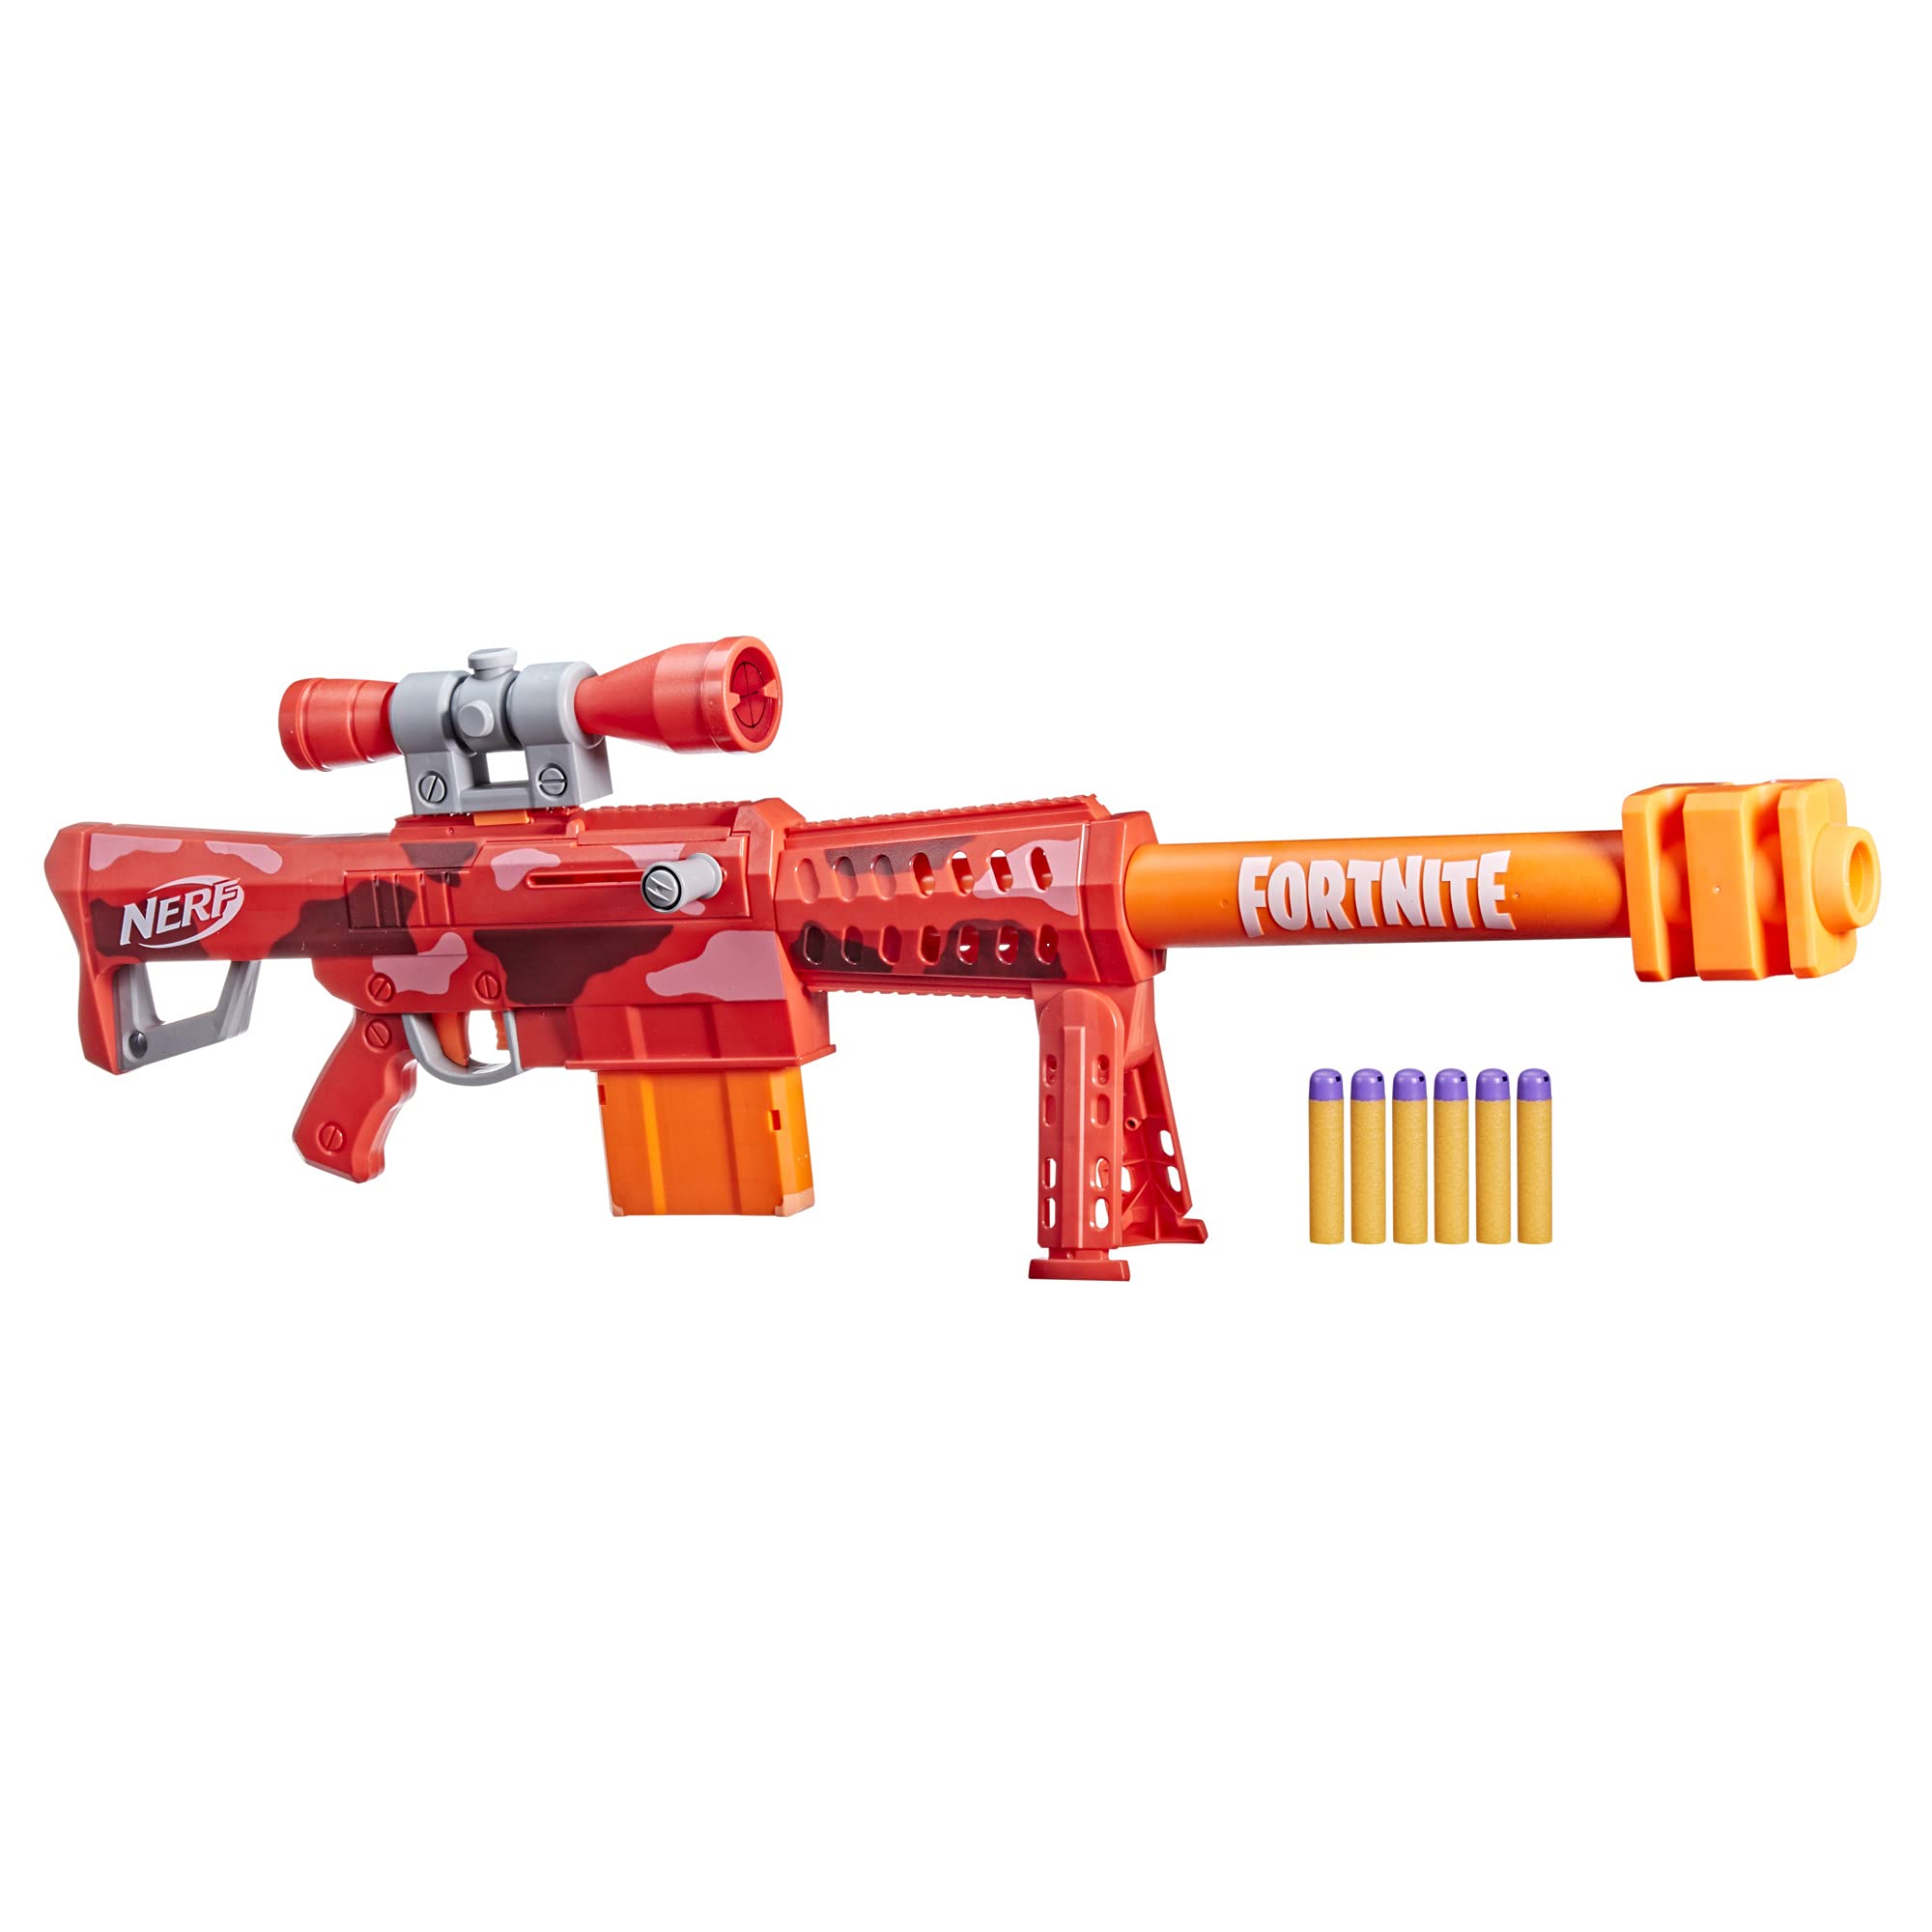 43" Nerf Fortnite Heavy SR Blaster w/ Removable Scope, Bolt Action, 6 Official Mega Darts and 6-Dart Clip $24.94 + Free Shipping w/ Prime or on $35+